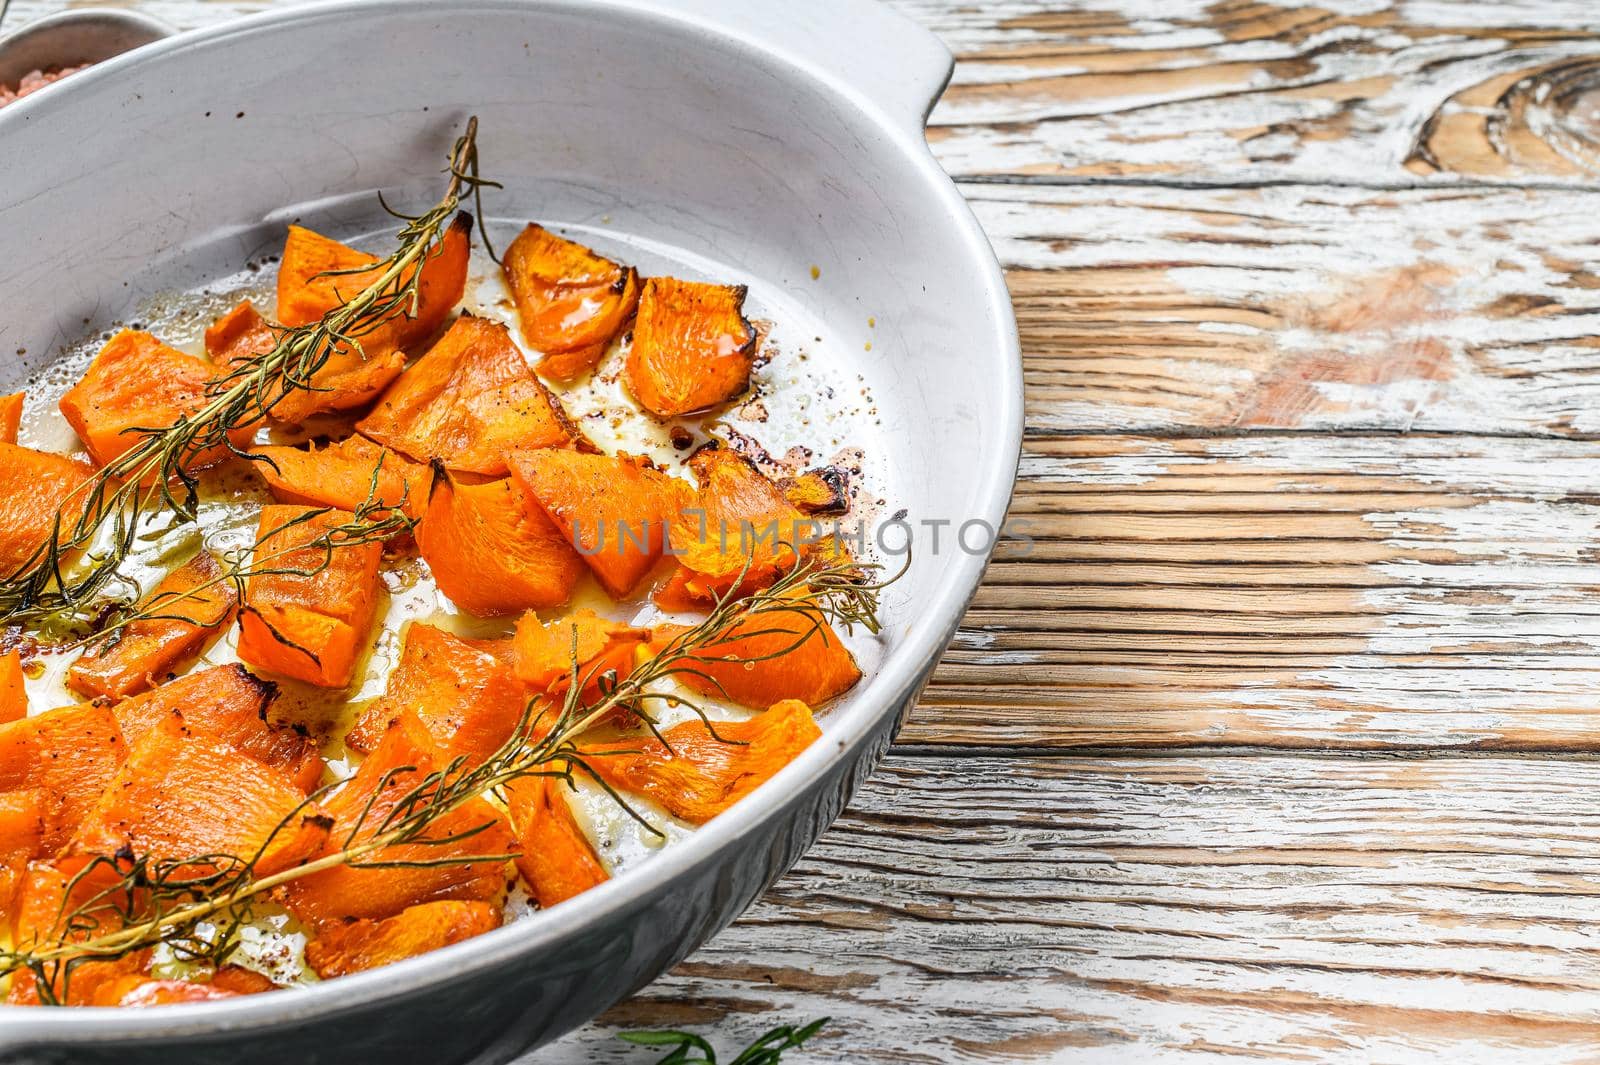 Oven baked pumpkin slices with rosemary, healthy vegetarian food. Wooden background. Top view. Copy space by Composter